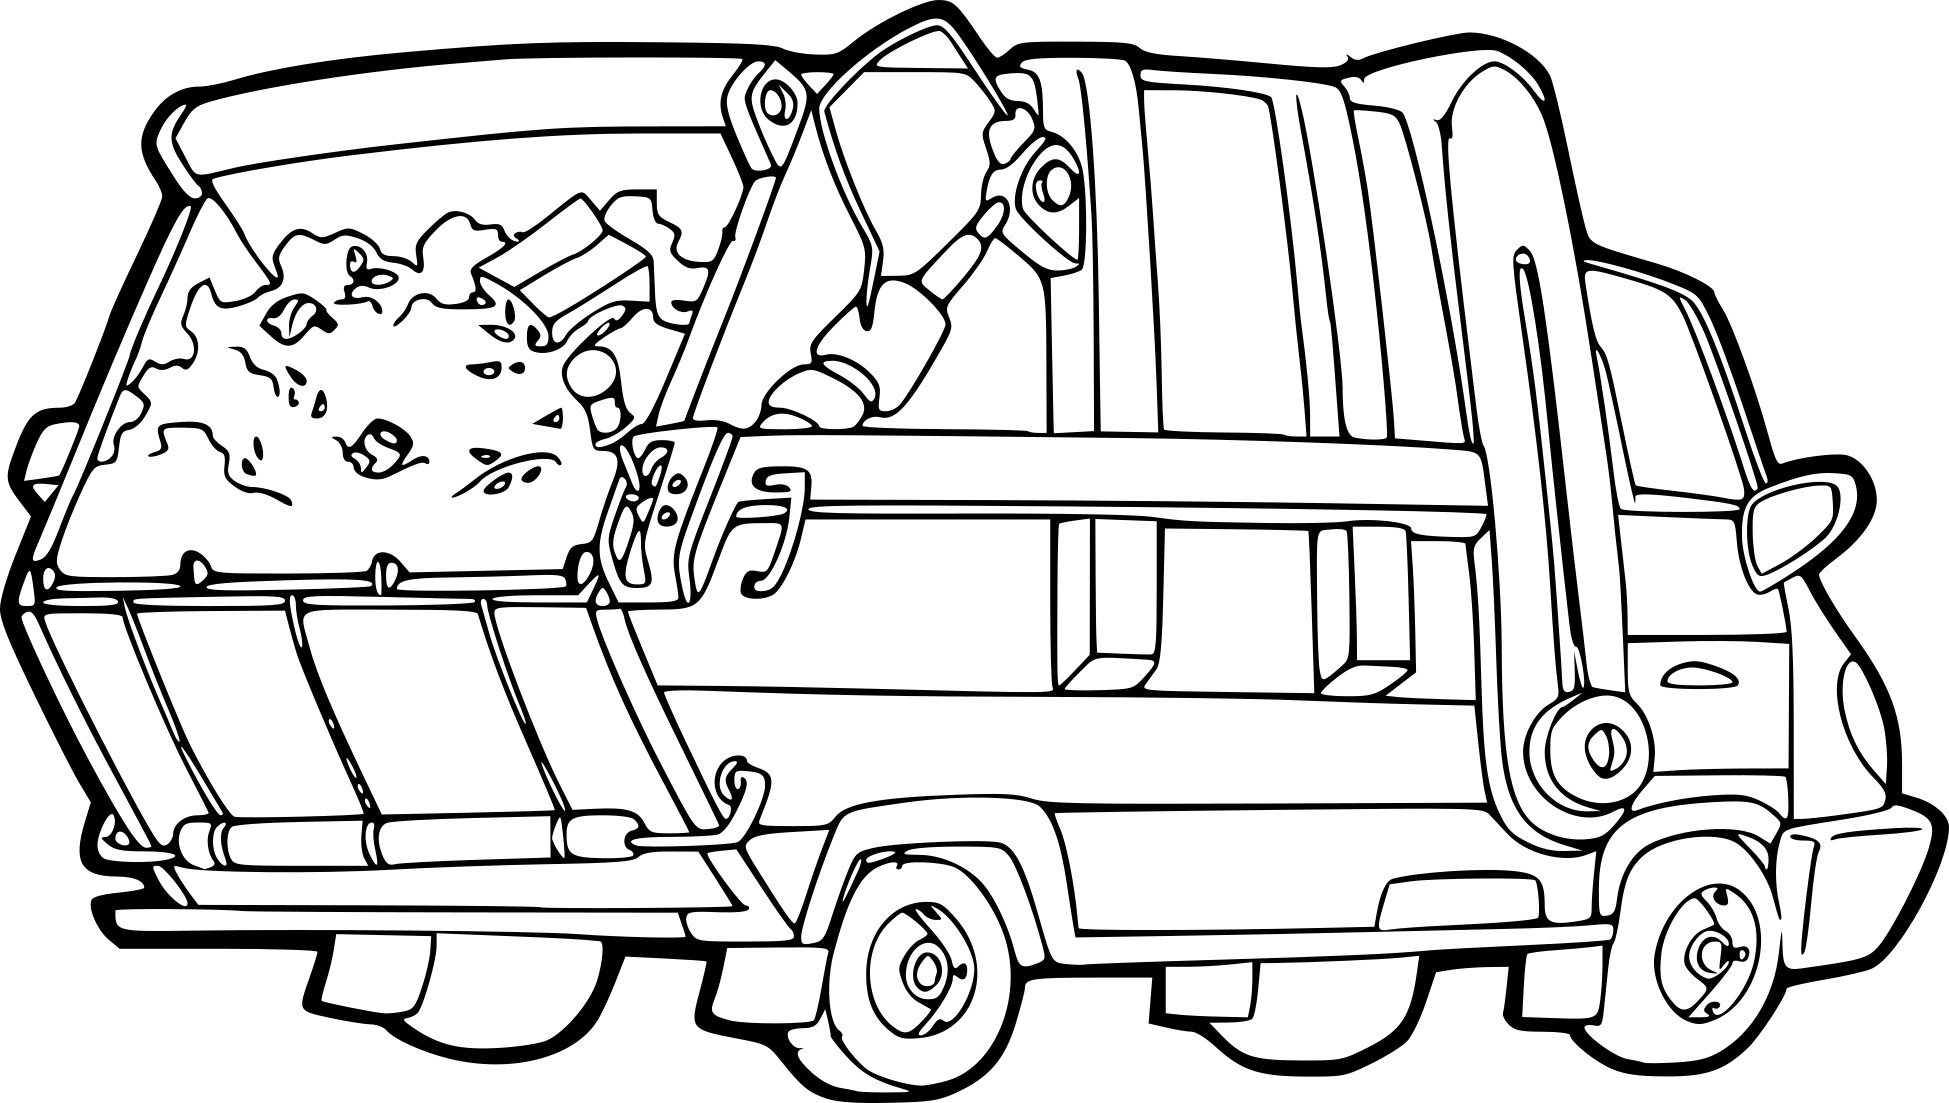 Garbage Truck coloring page - free printable coloring pages on coloori.com